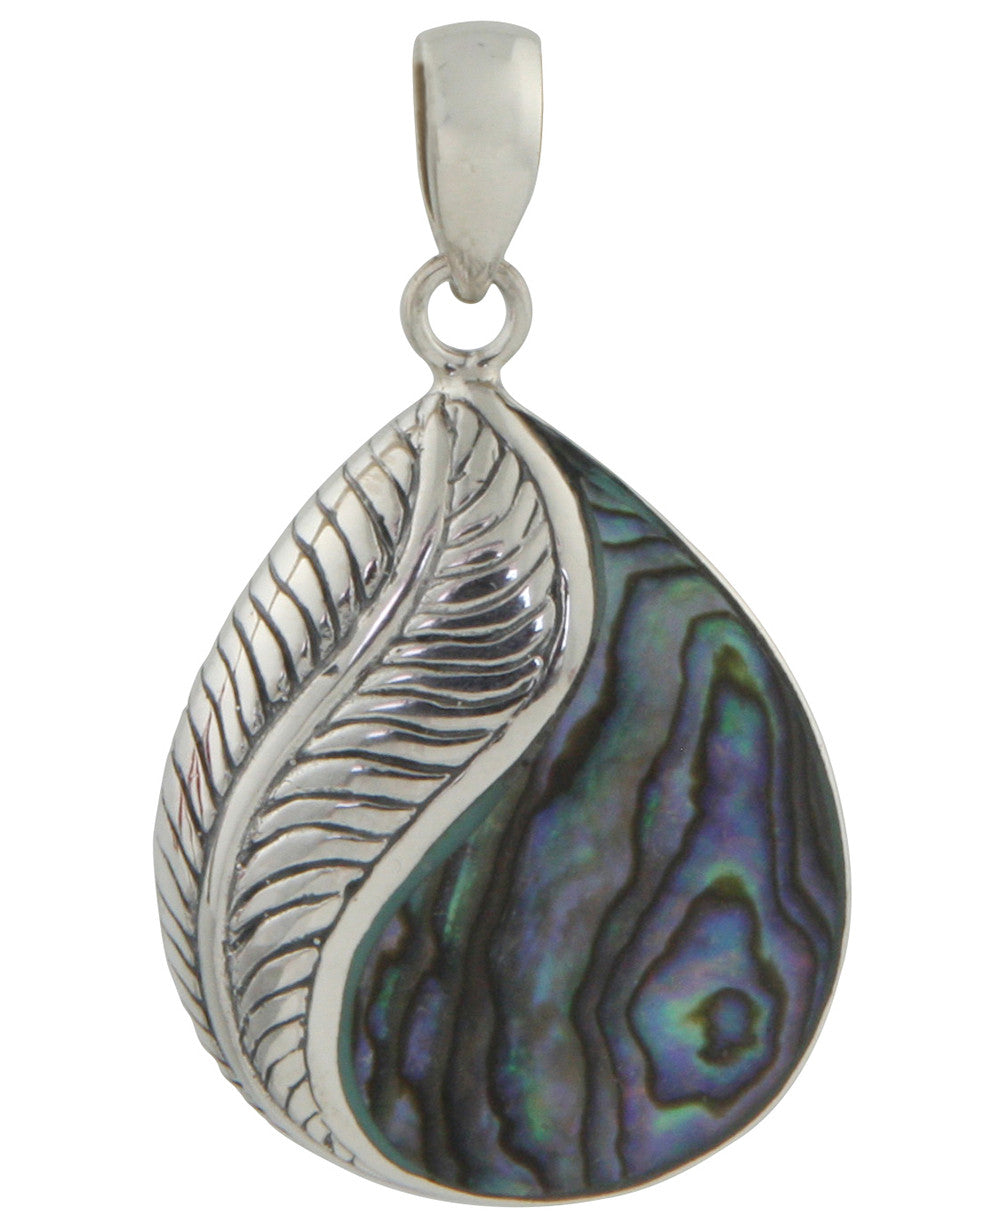 Indonesian Feather Pendant with Abalone Shell – Cultural Elements